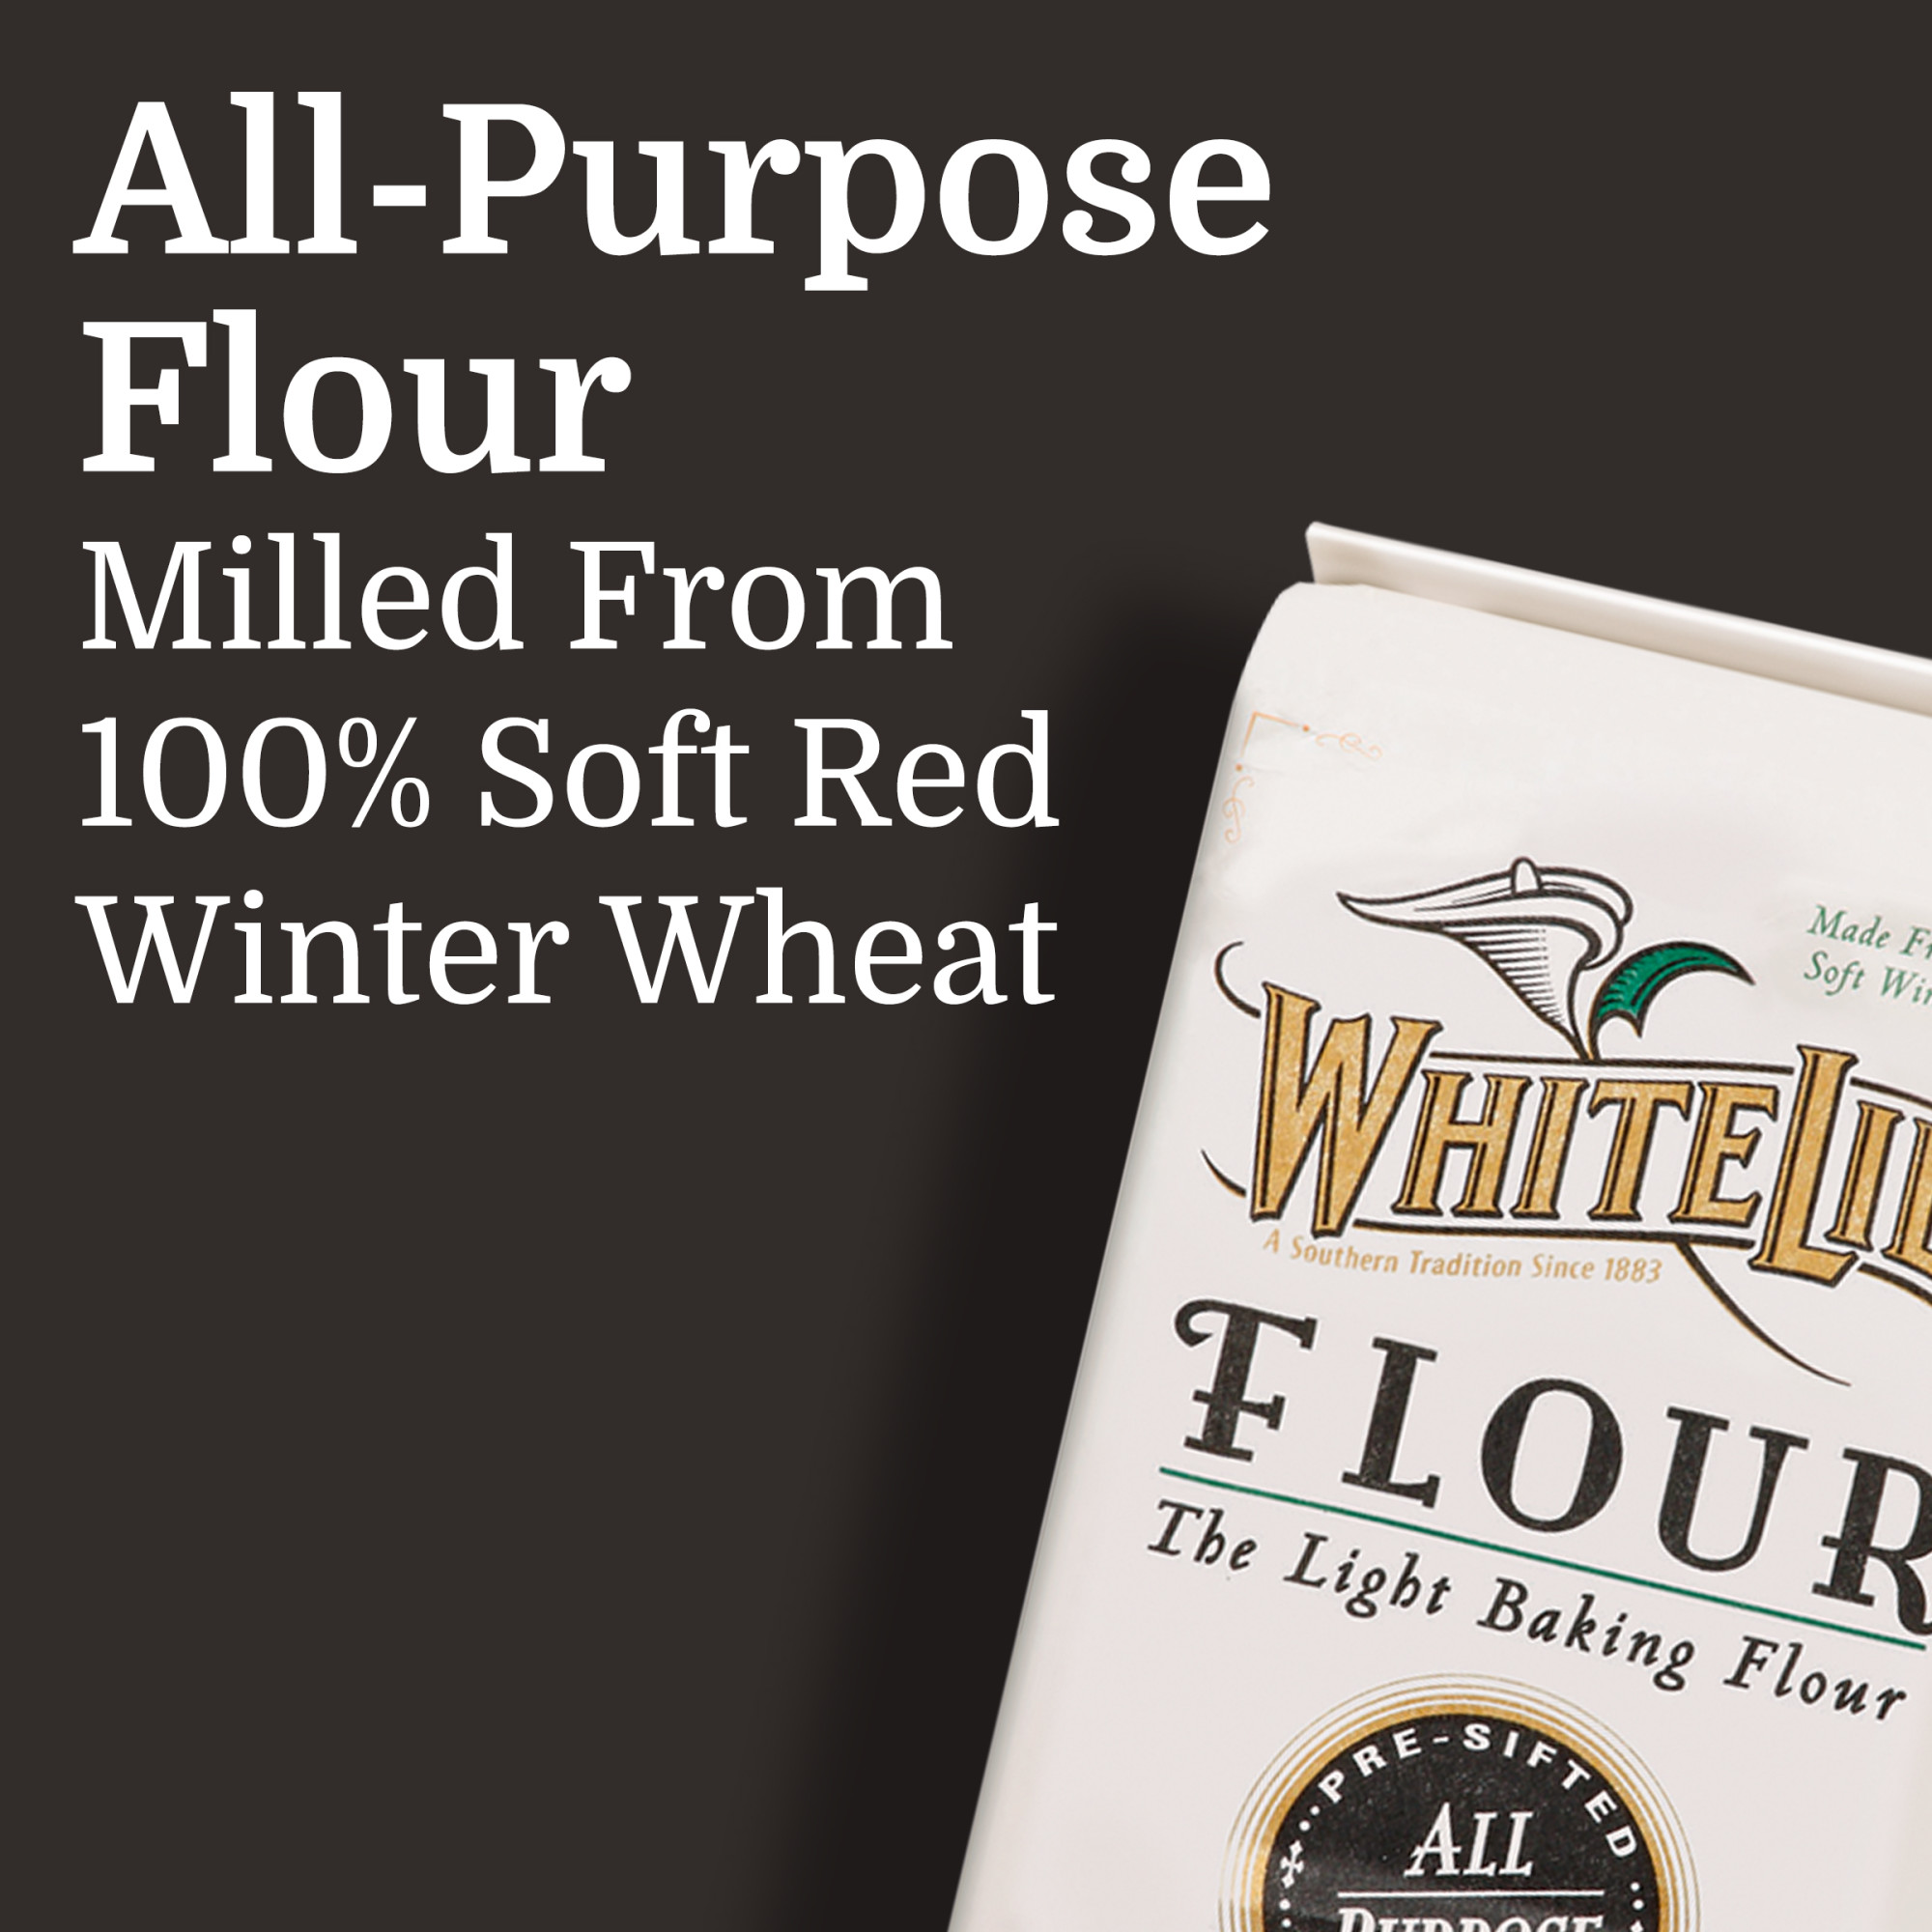 White Lily All Purpose Flour, 5 lb Bag - image 2 of 8